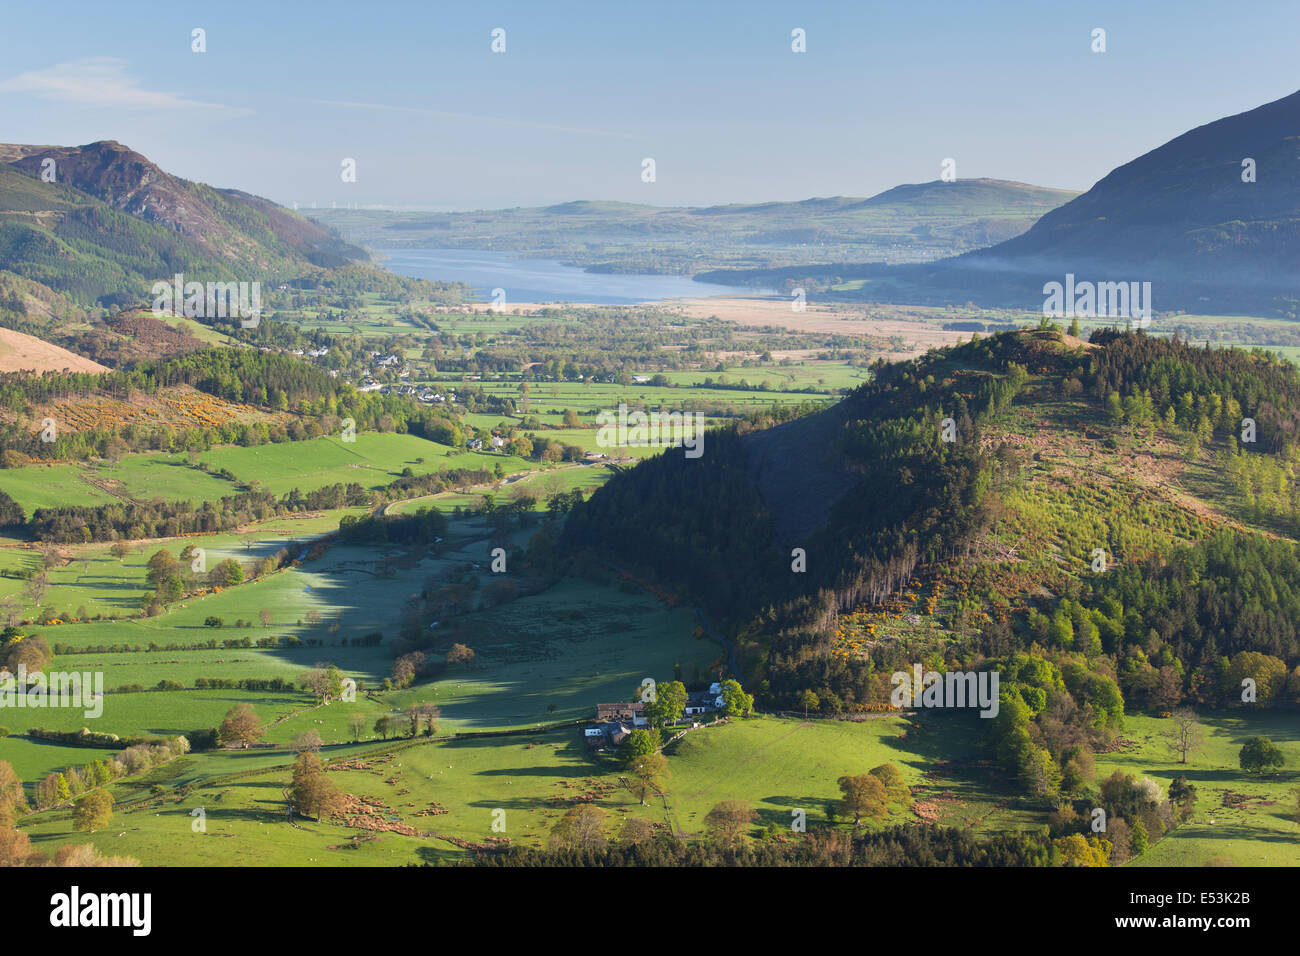 View towards Bassenthwaite Lake from Catbells showing part of the Newlands Valley, Lake District, Cumbria, UK Stock Photo